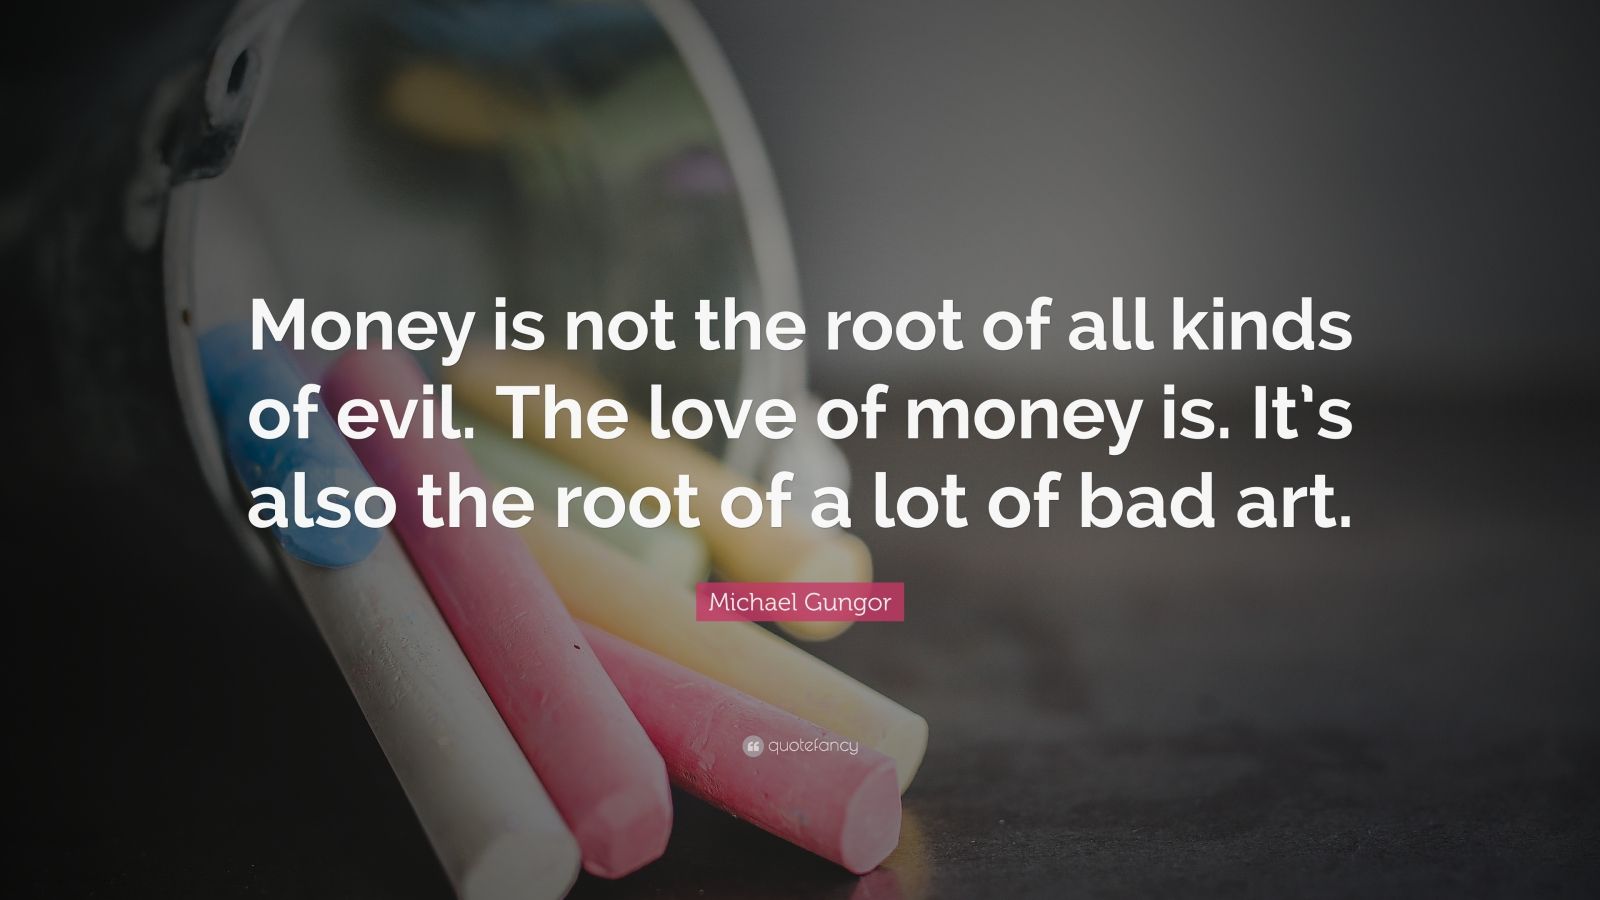 Michael Gungor Quote: “Money is not the root of all kinds of evil. The ...